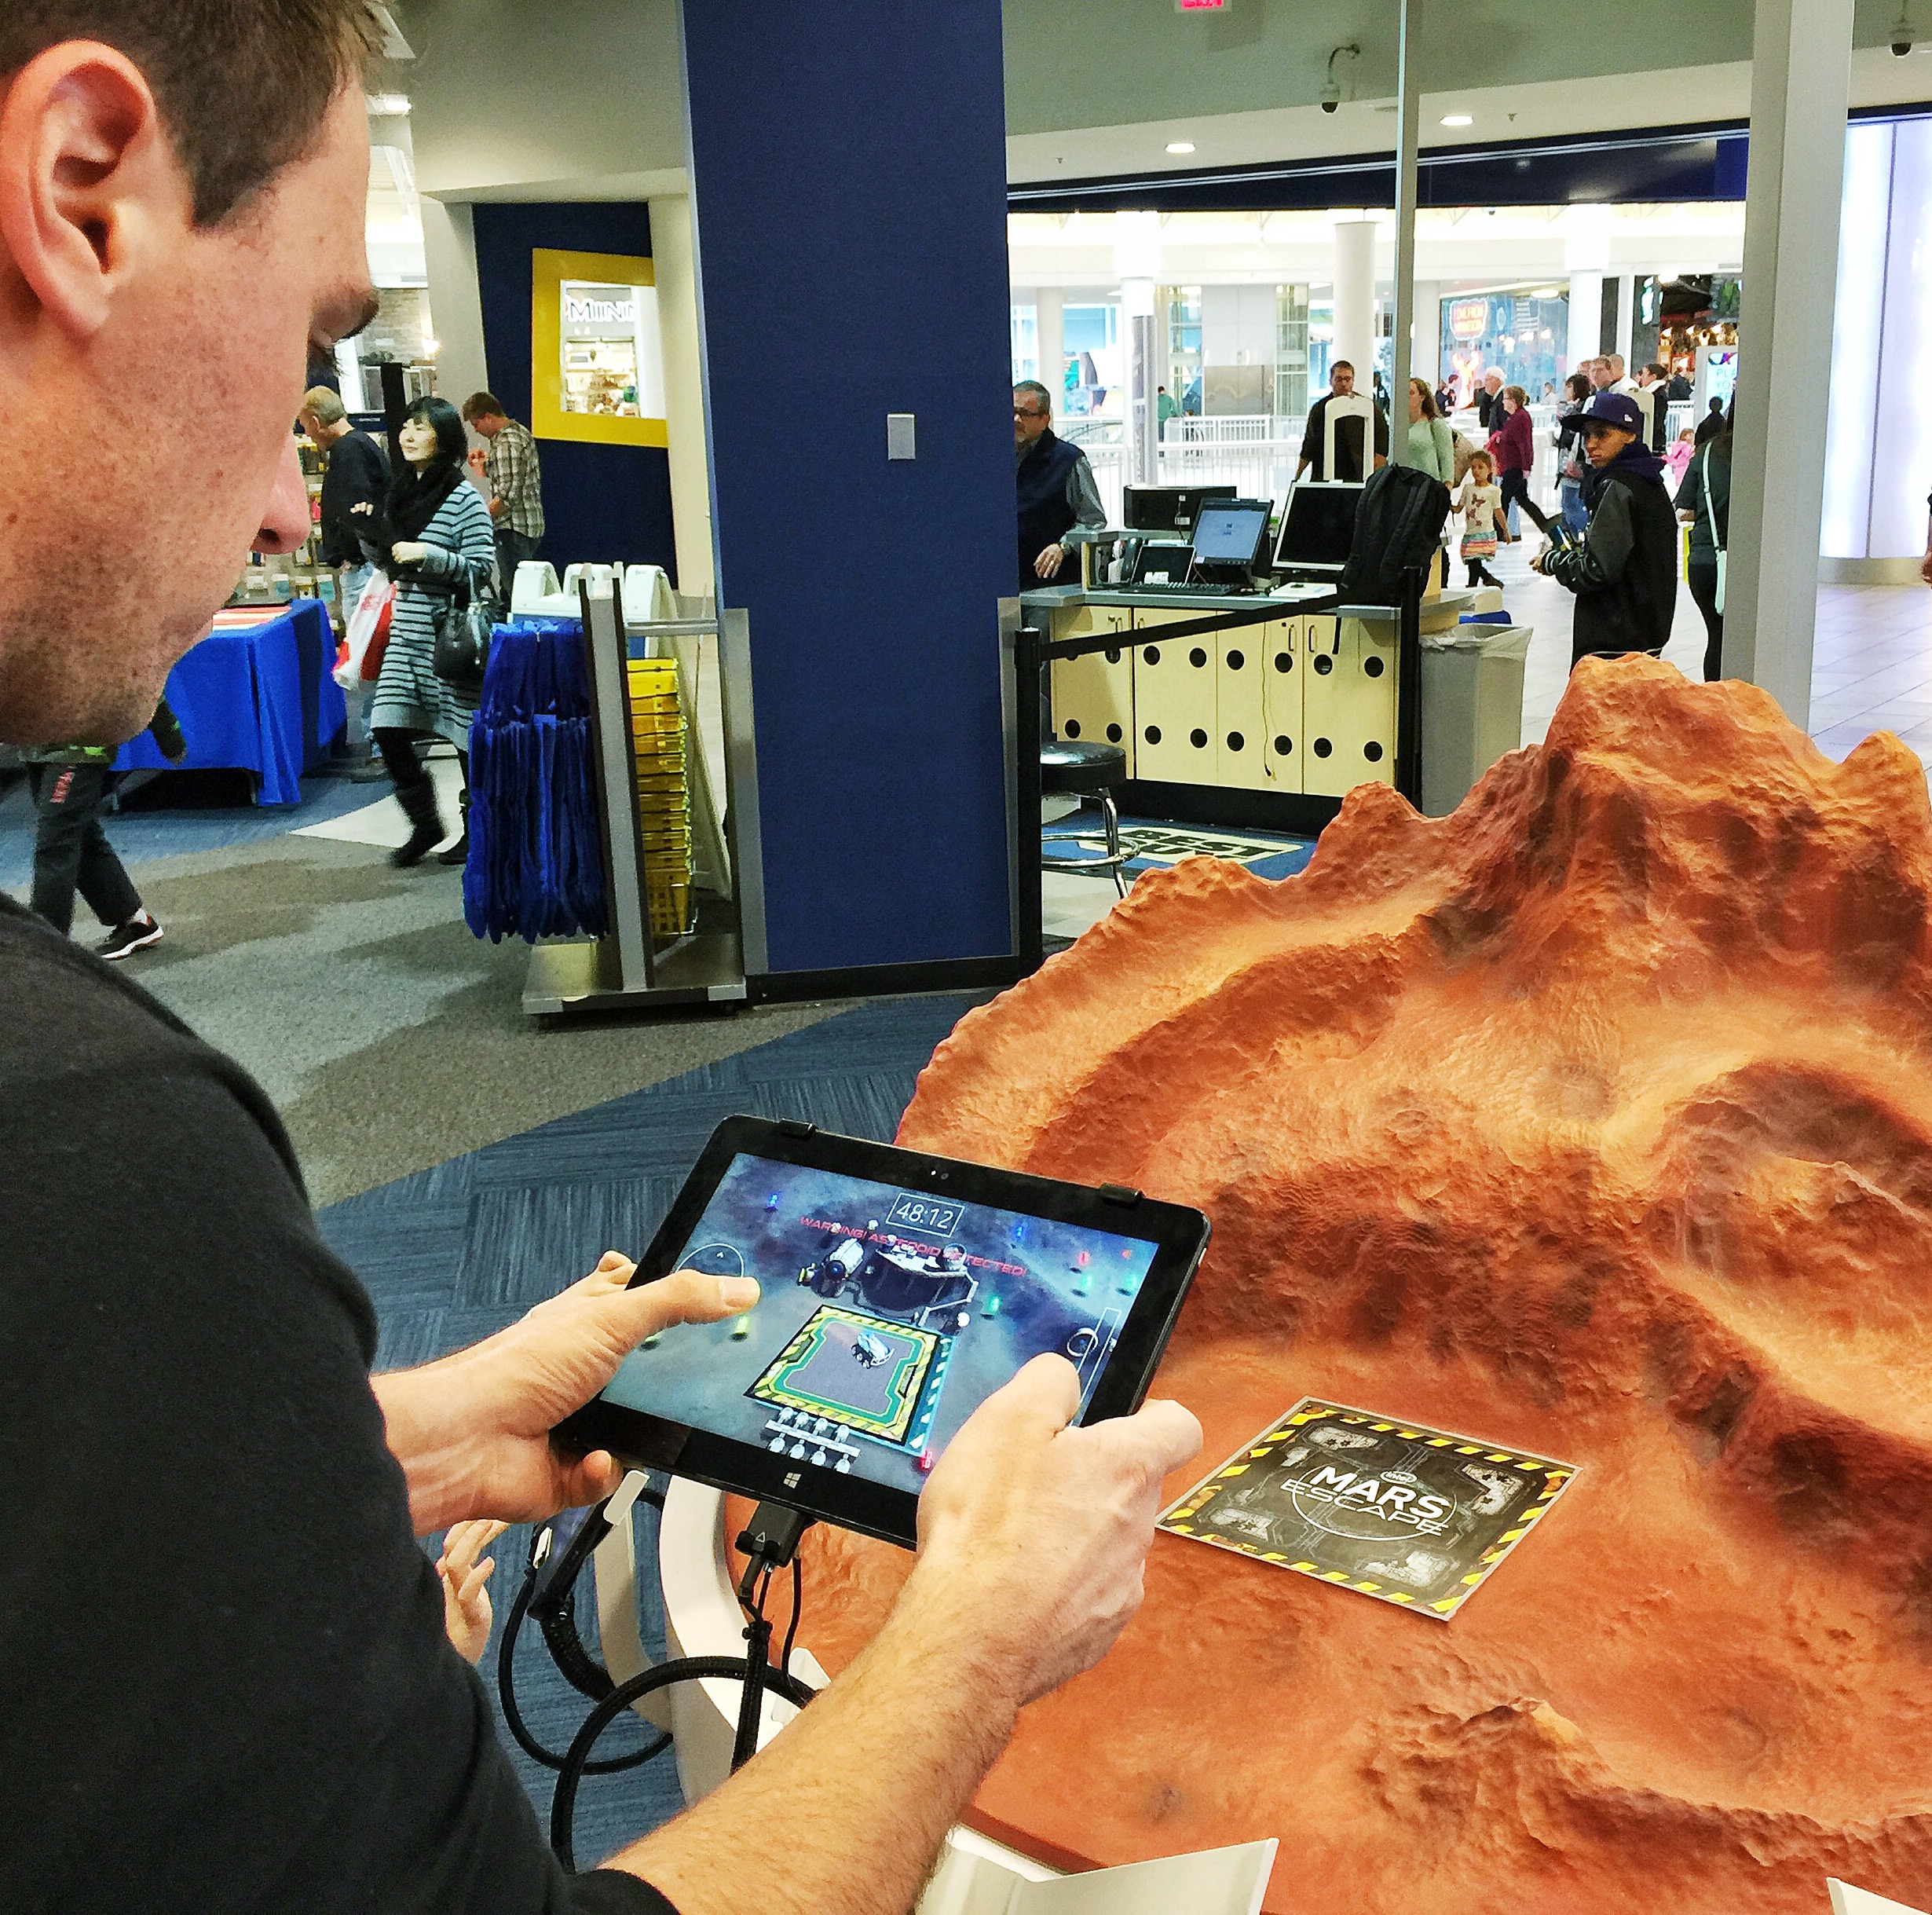 Experience Intel Technology First Hand at Best Buy Stores #IntelatBestBuy